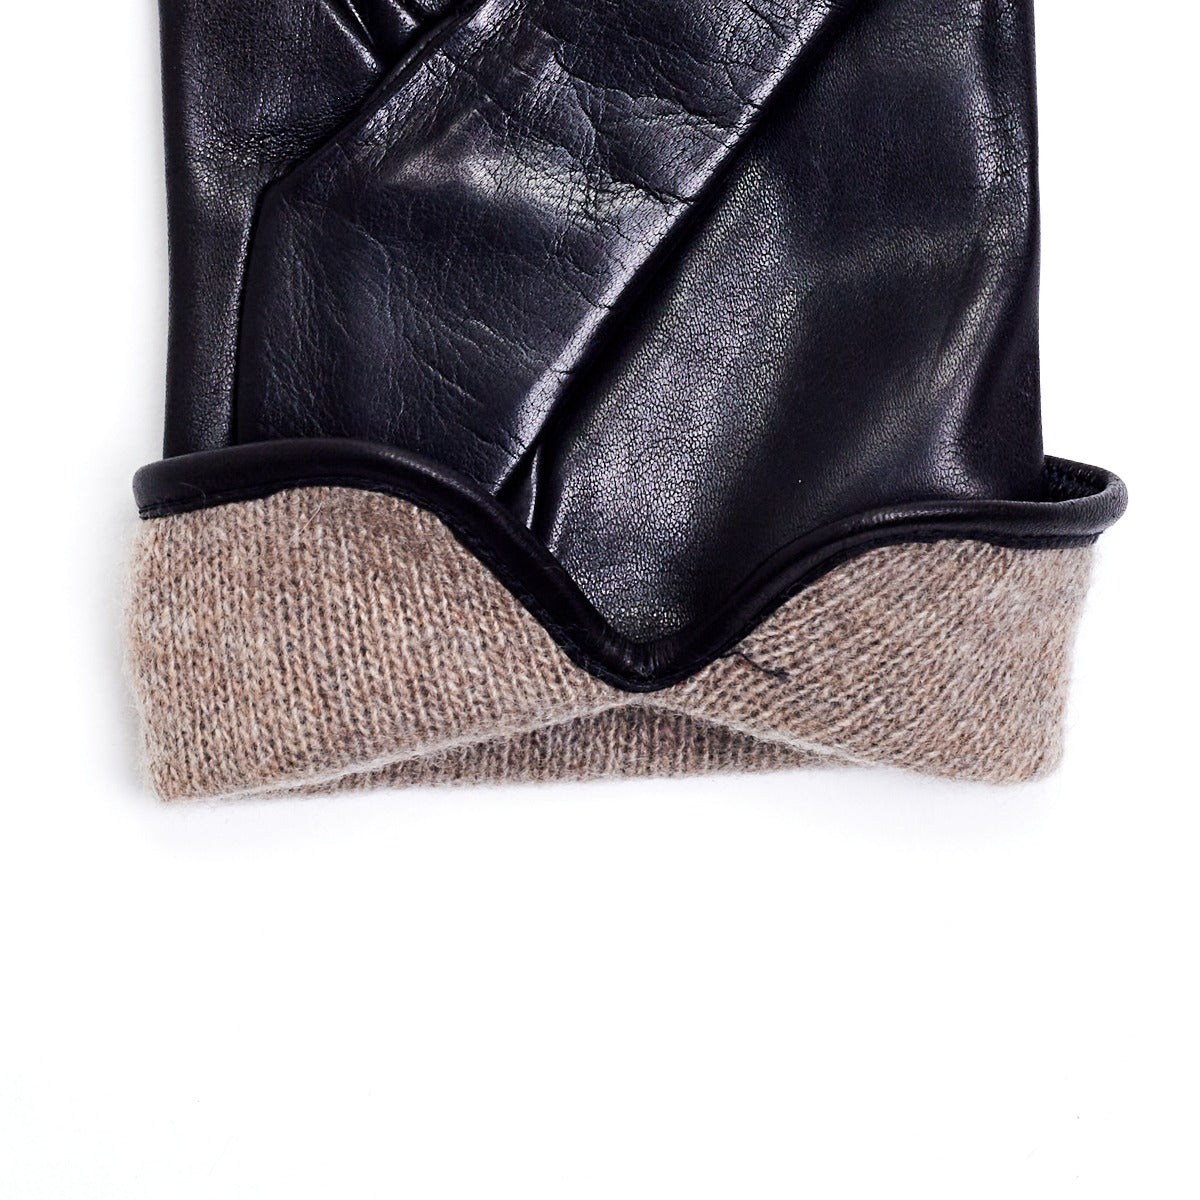 A pair of Sovereign Grade Black Nappa Leather Gloves, Cashmere Lined by KirbyAllison.com on a white surface, perfect for formal use.